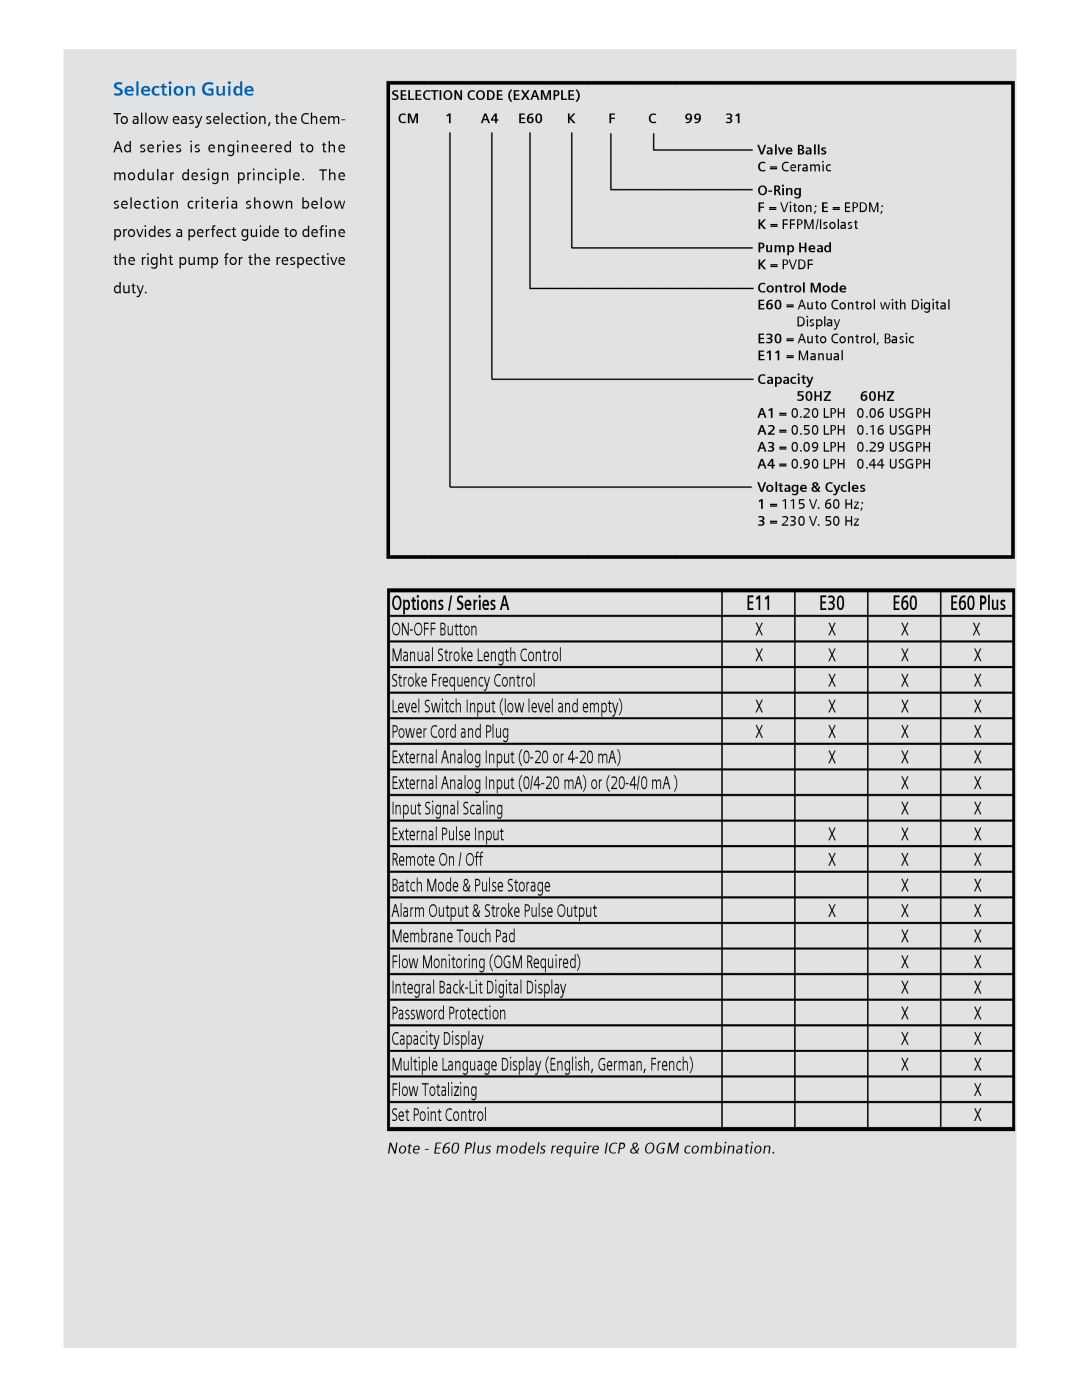 Siemens Chem-Ad Series manual Selection Guide, Options / Series A 